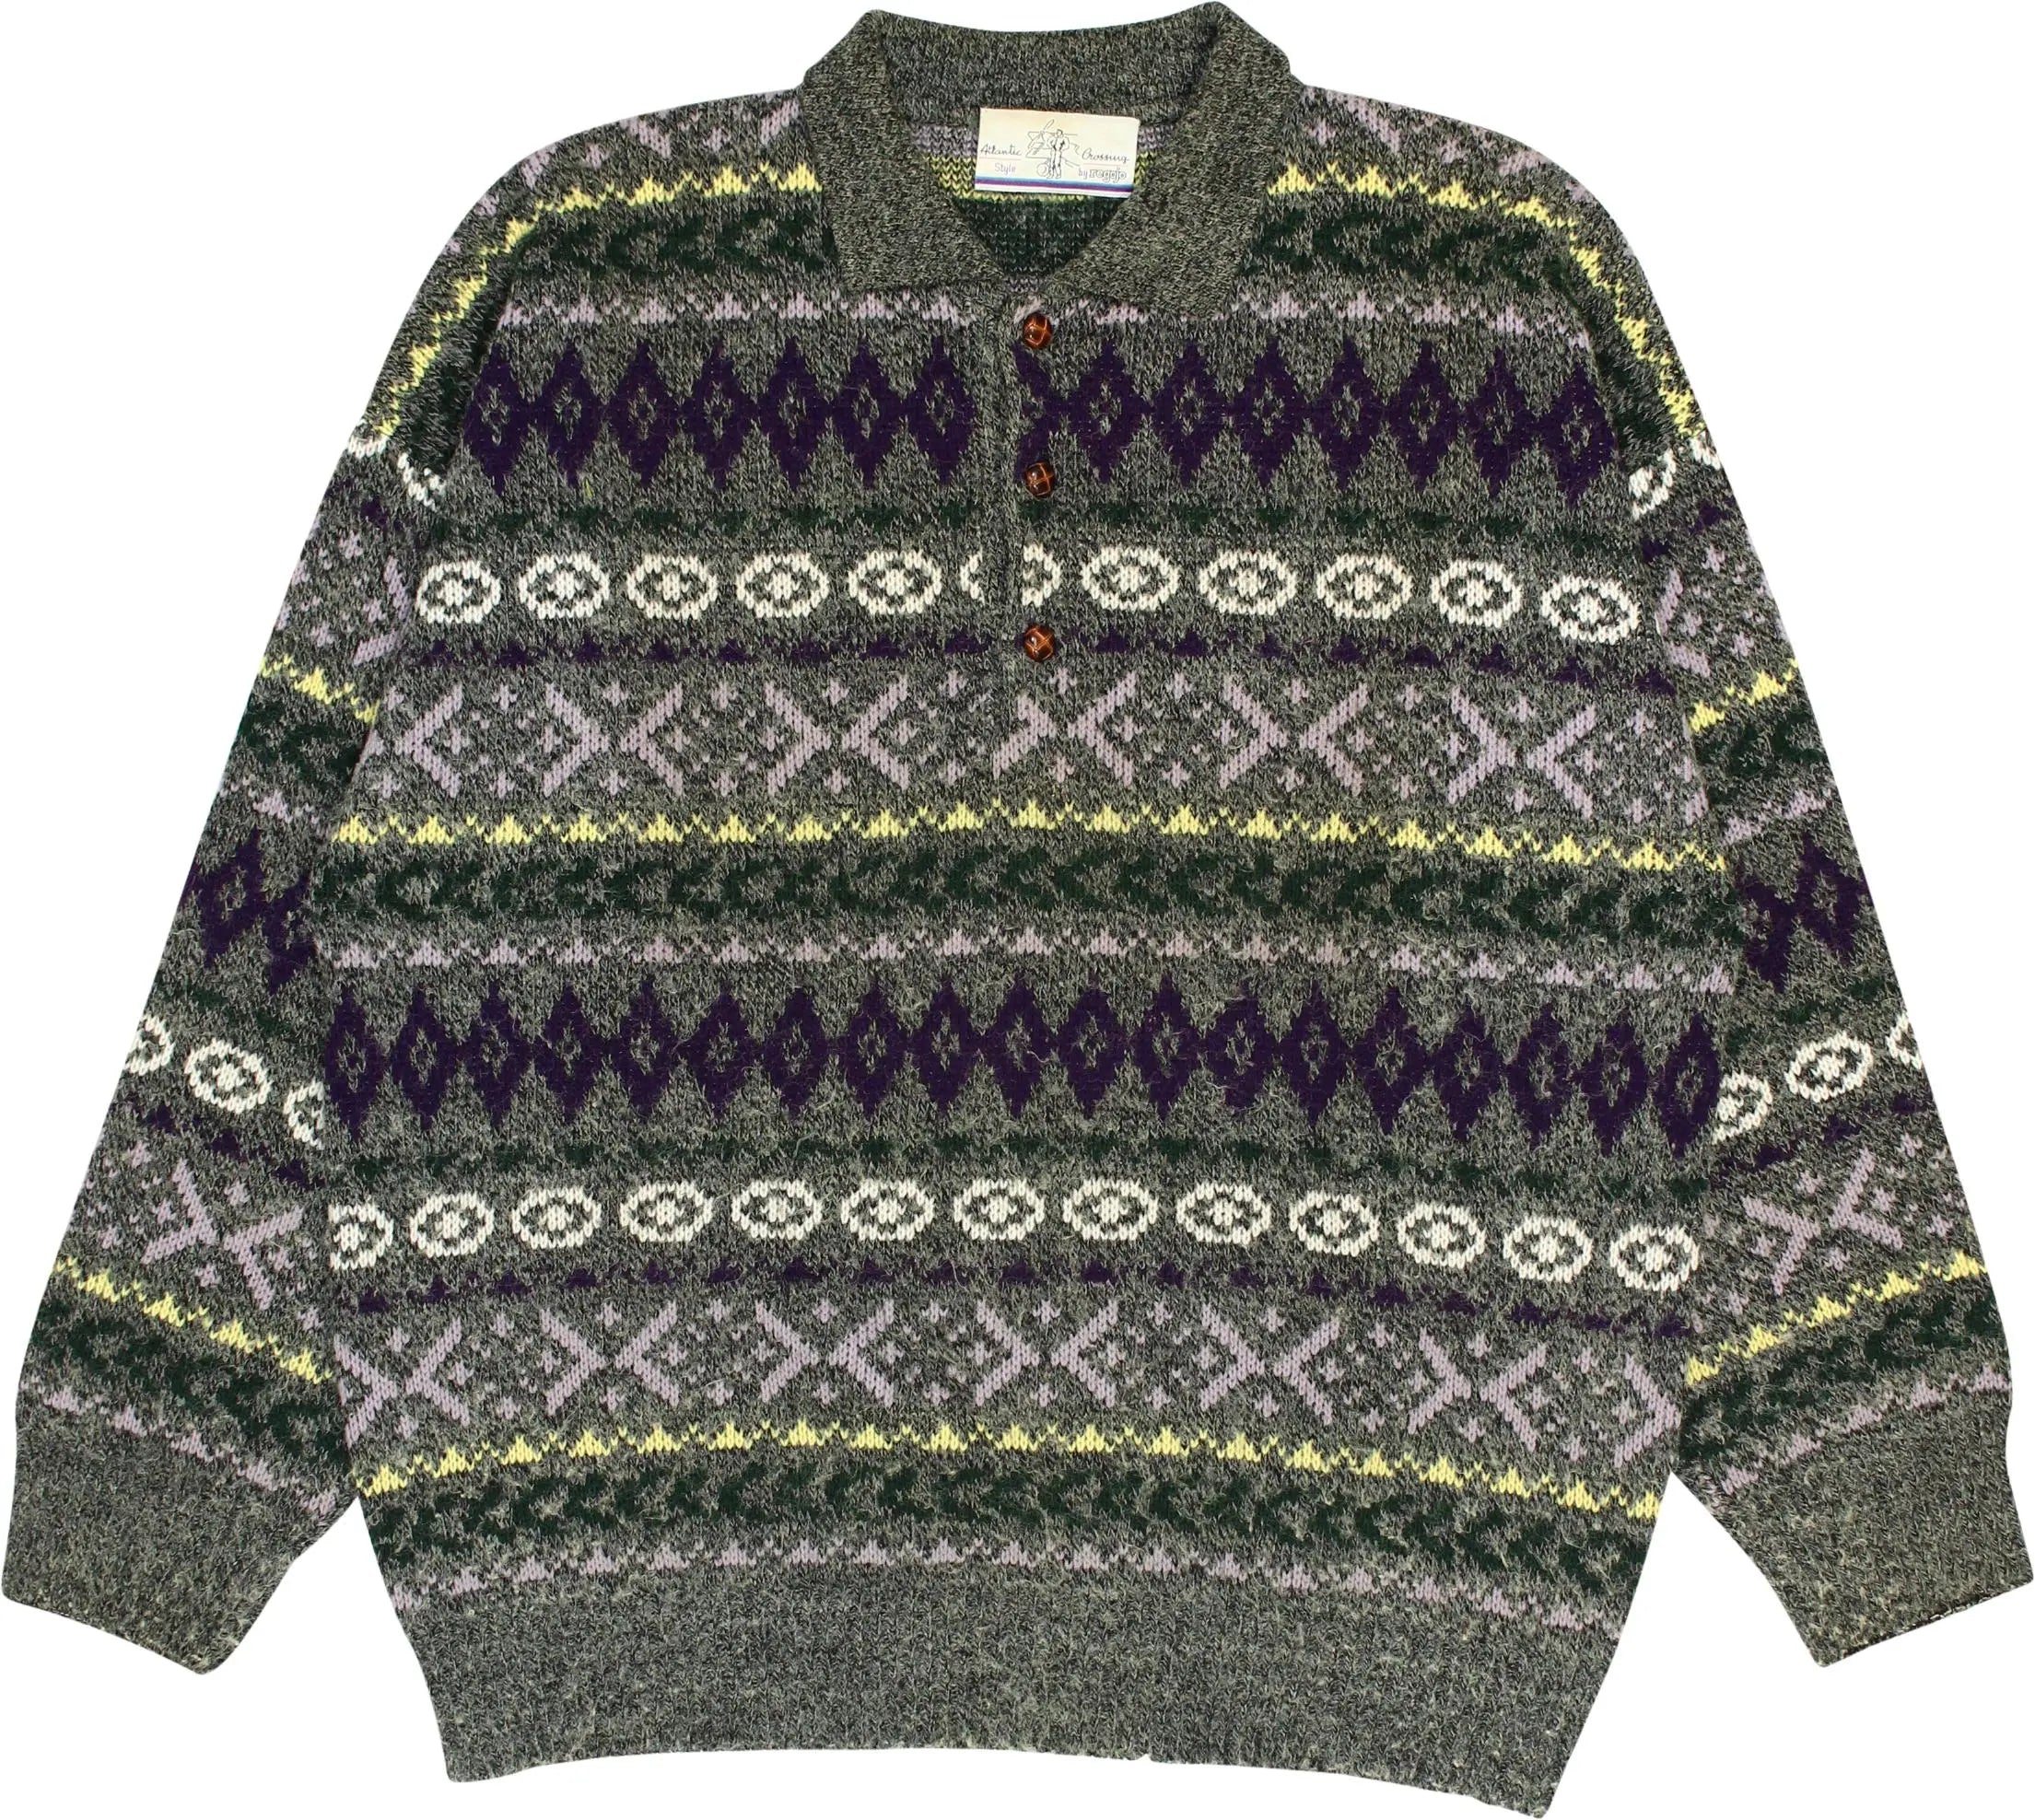 Reggio - 80s Jumper- ThriftTale.com - Vintage and second handclothing